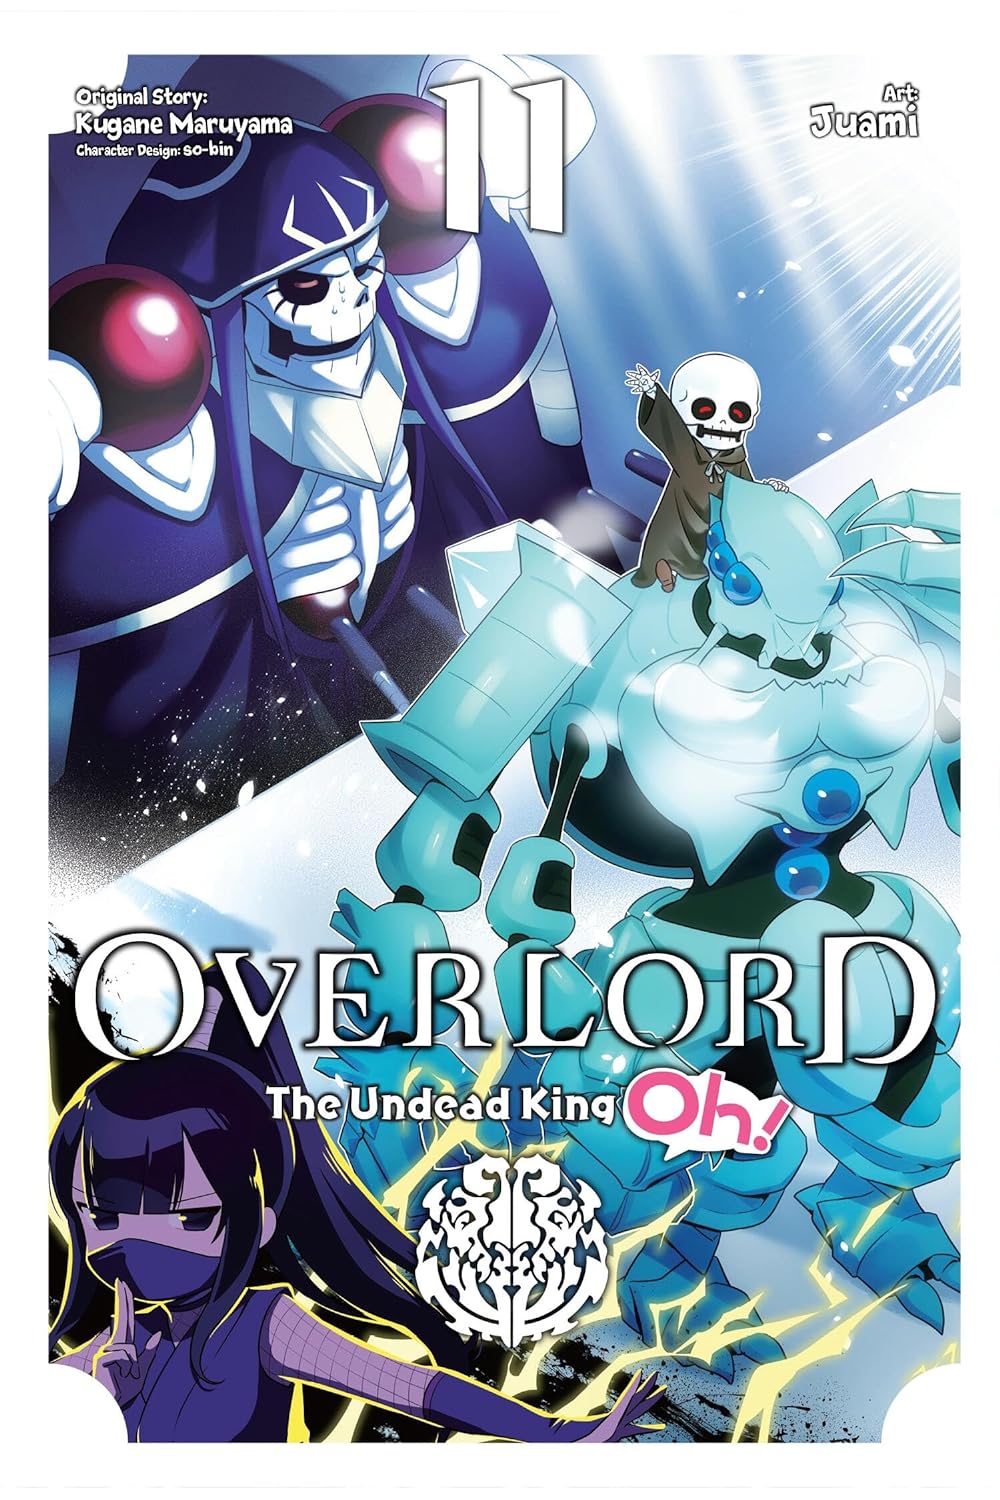 Overlord: The Undead King Oh! Vol. 11